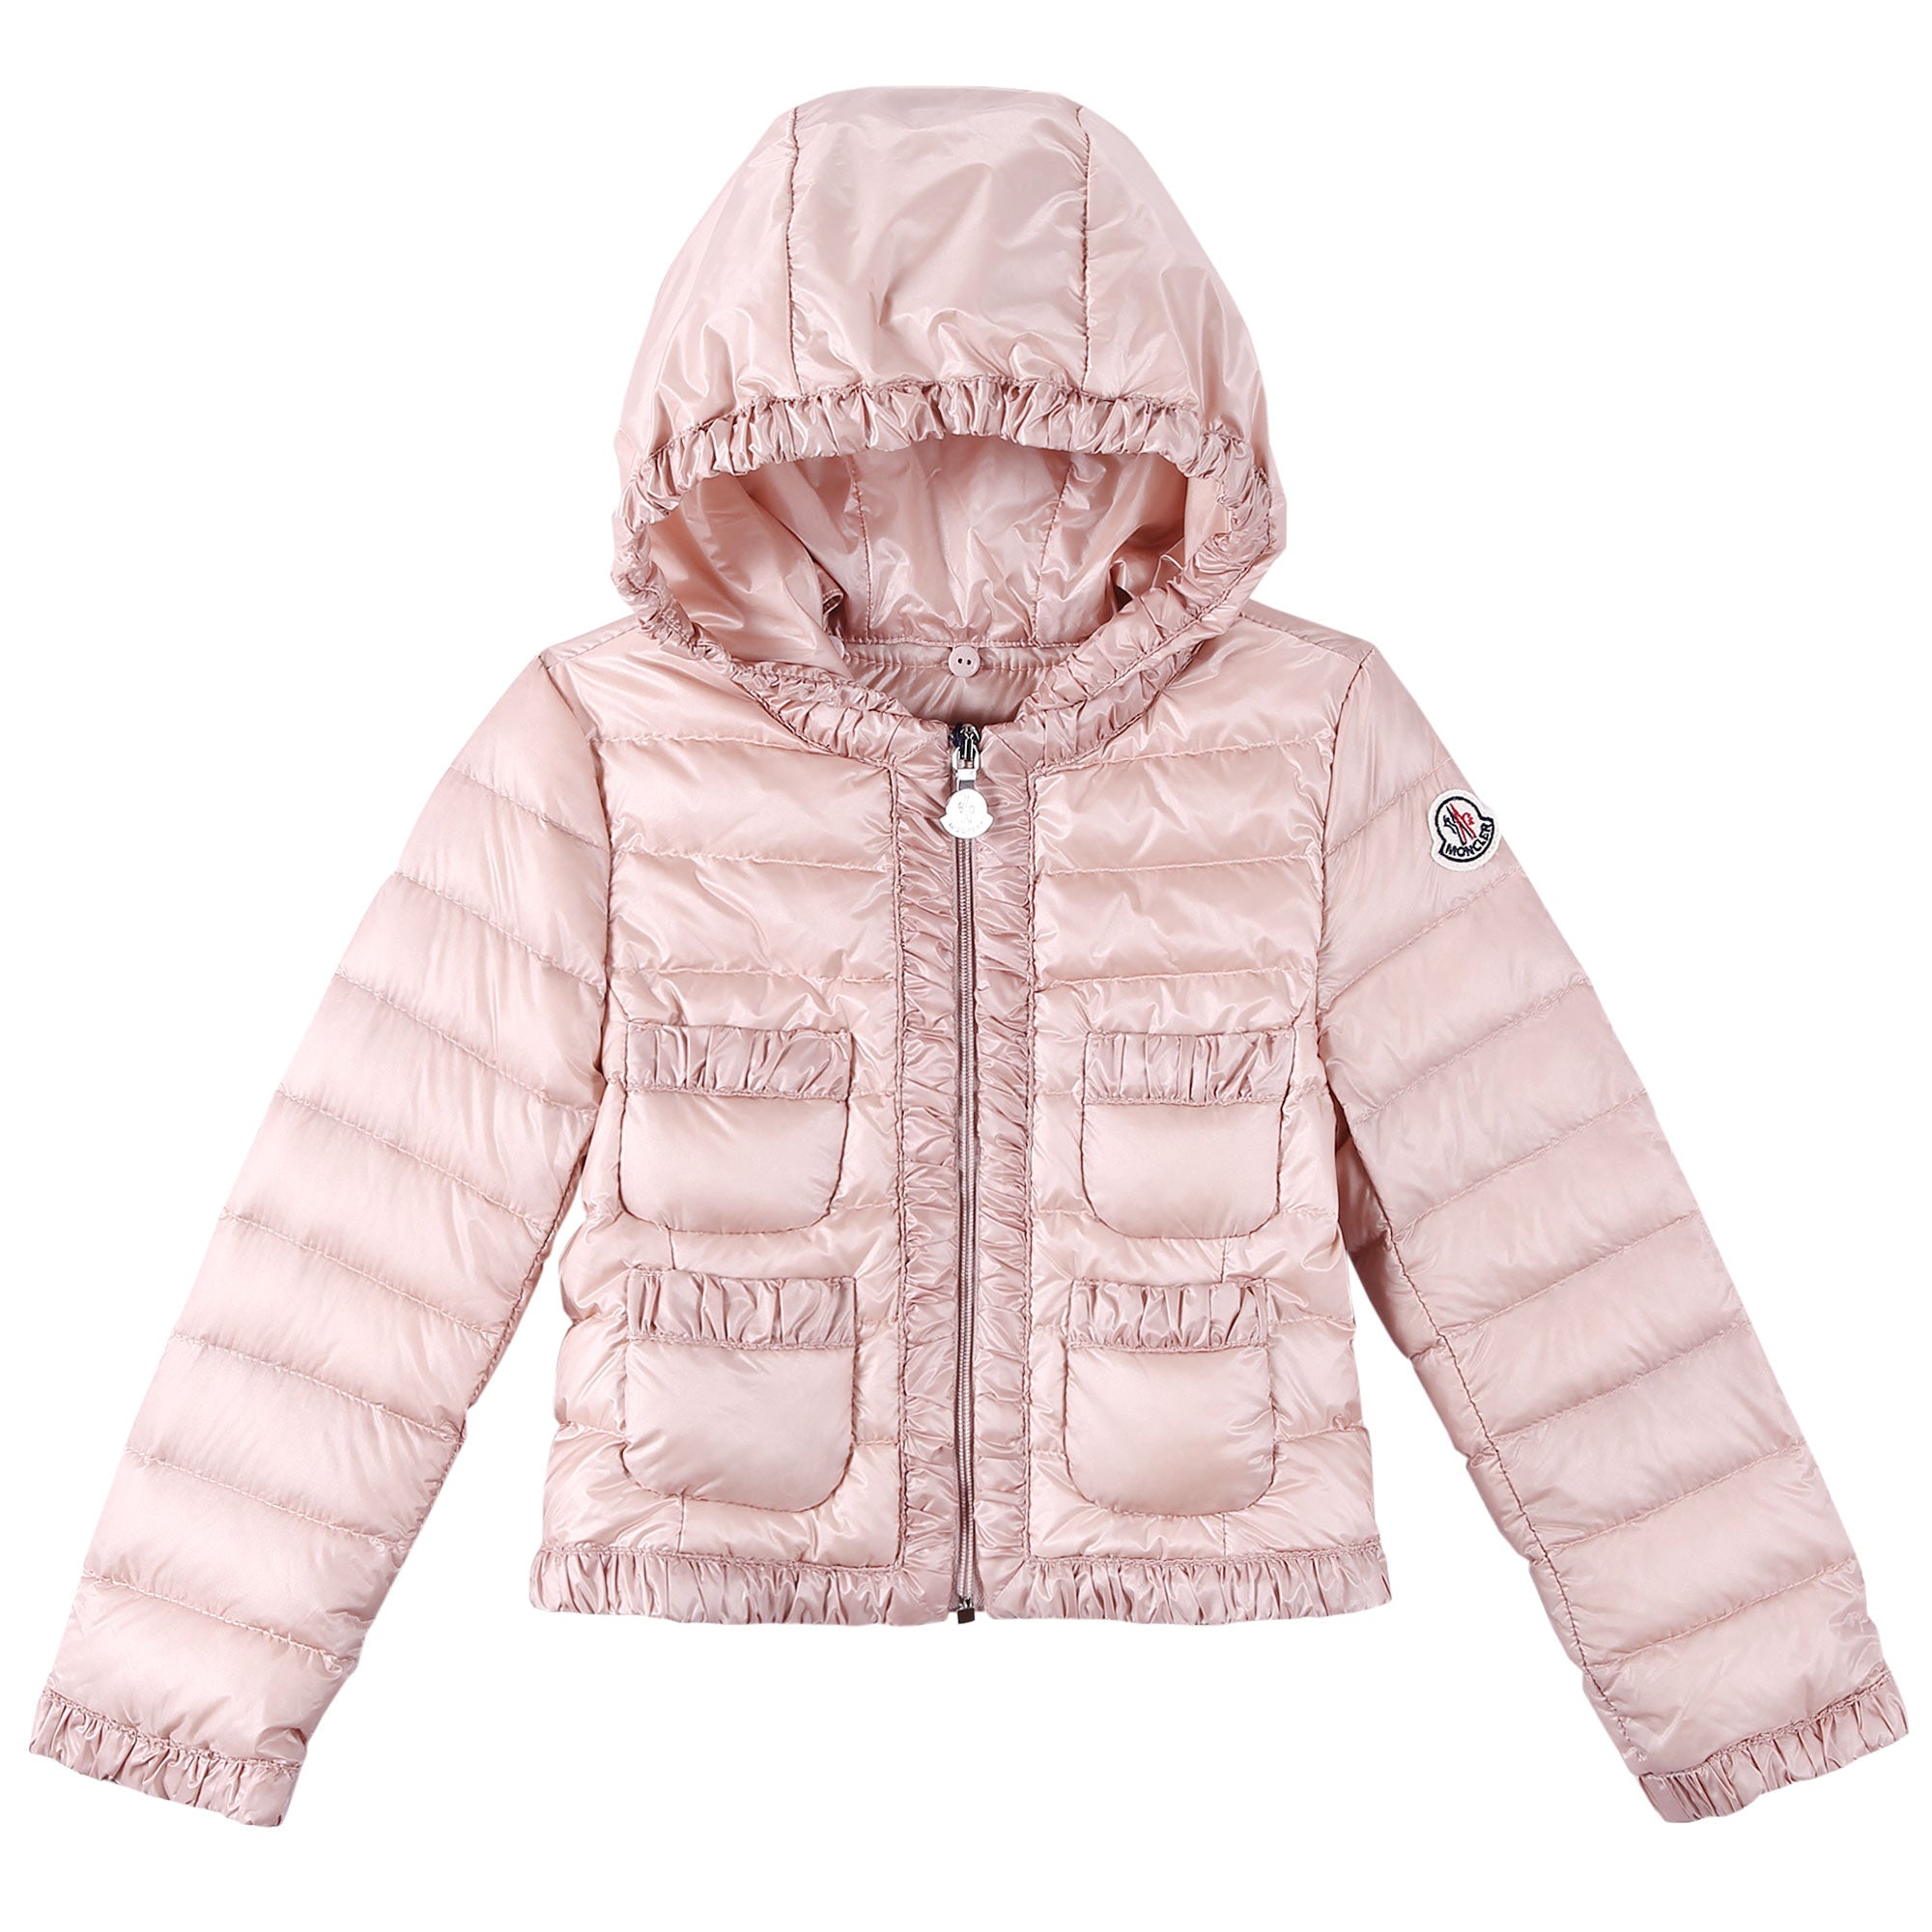 Baby Girls Pink Down Padded 'Flavienne' Jacket With Frilly Cuffs - CÉMAROSE | Children's Fashion Store - 1